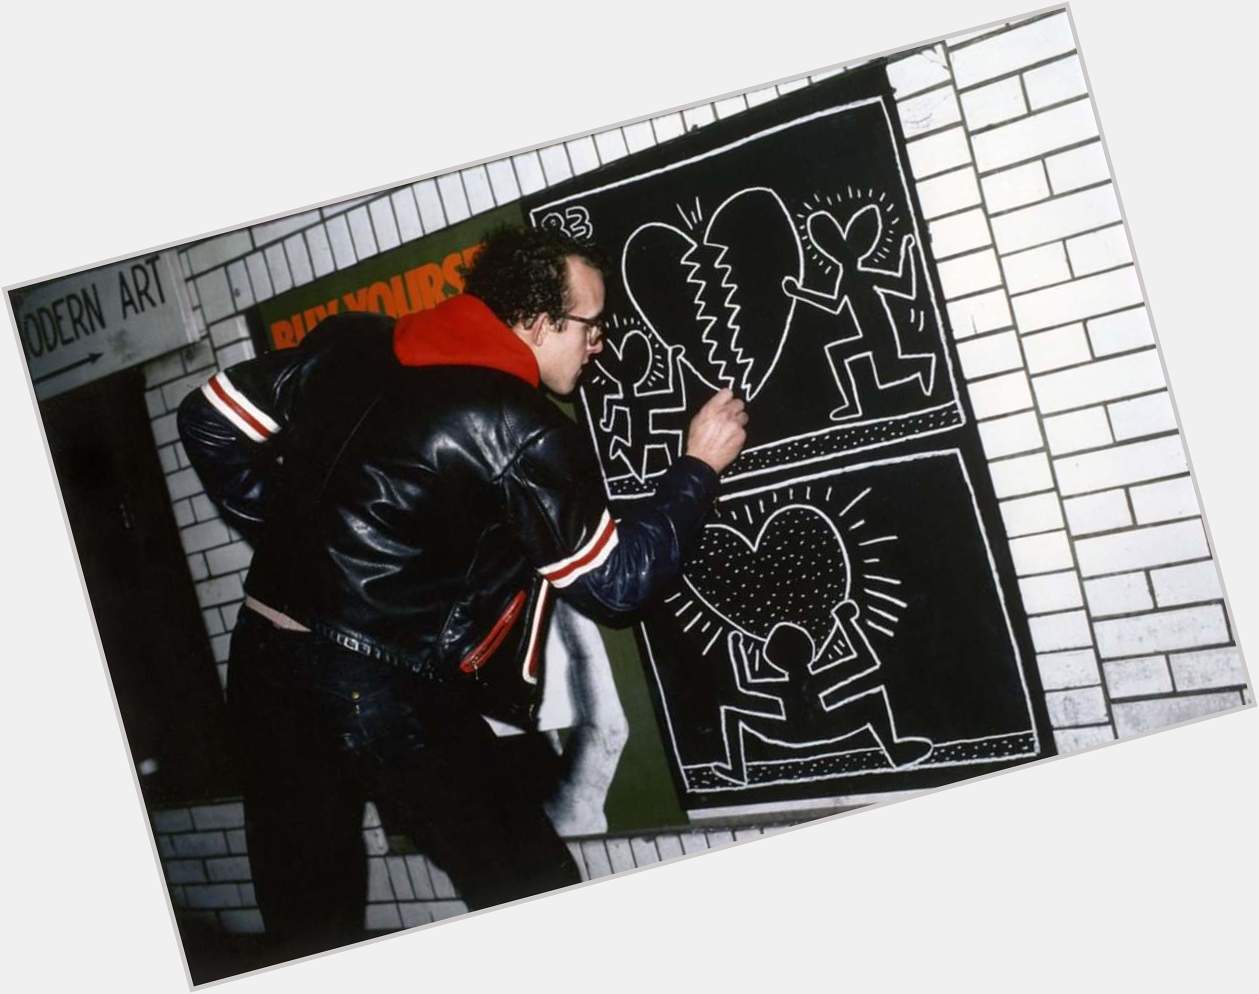 Happy birthday, Keith Haring. Photographed in the NYC subway by Tseng Kwong Chi in 1983 